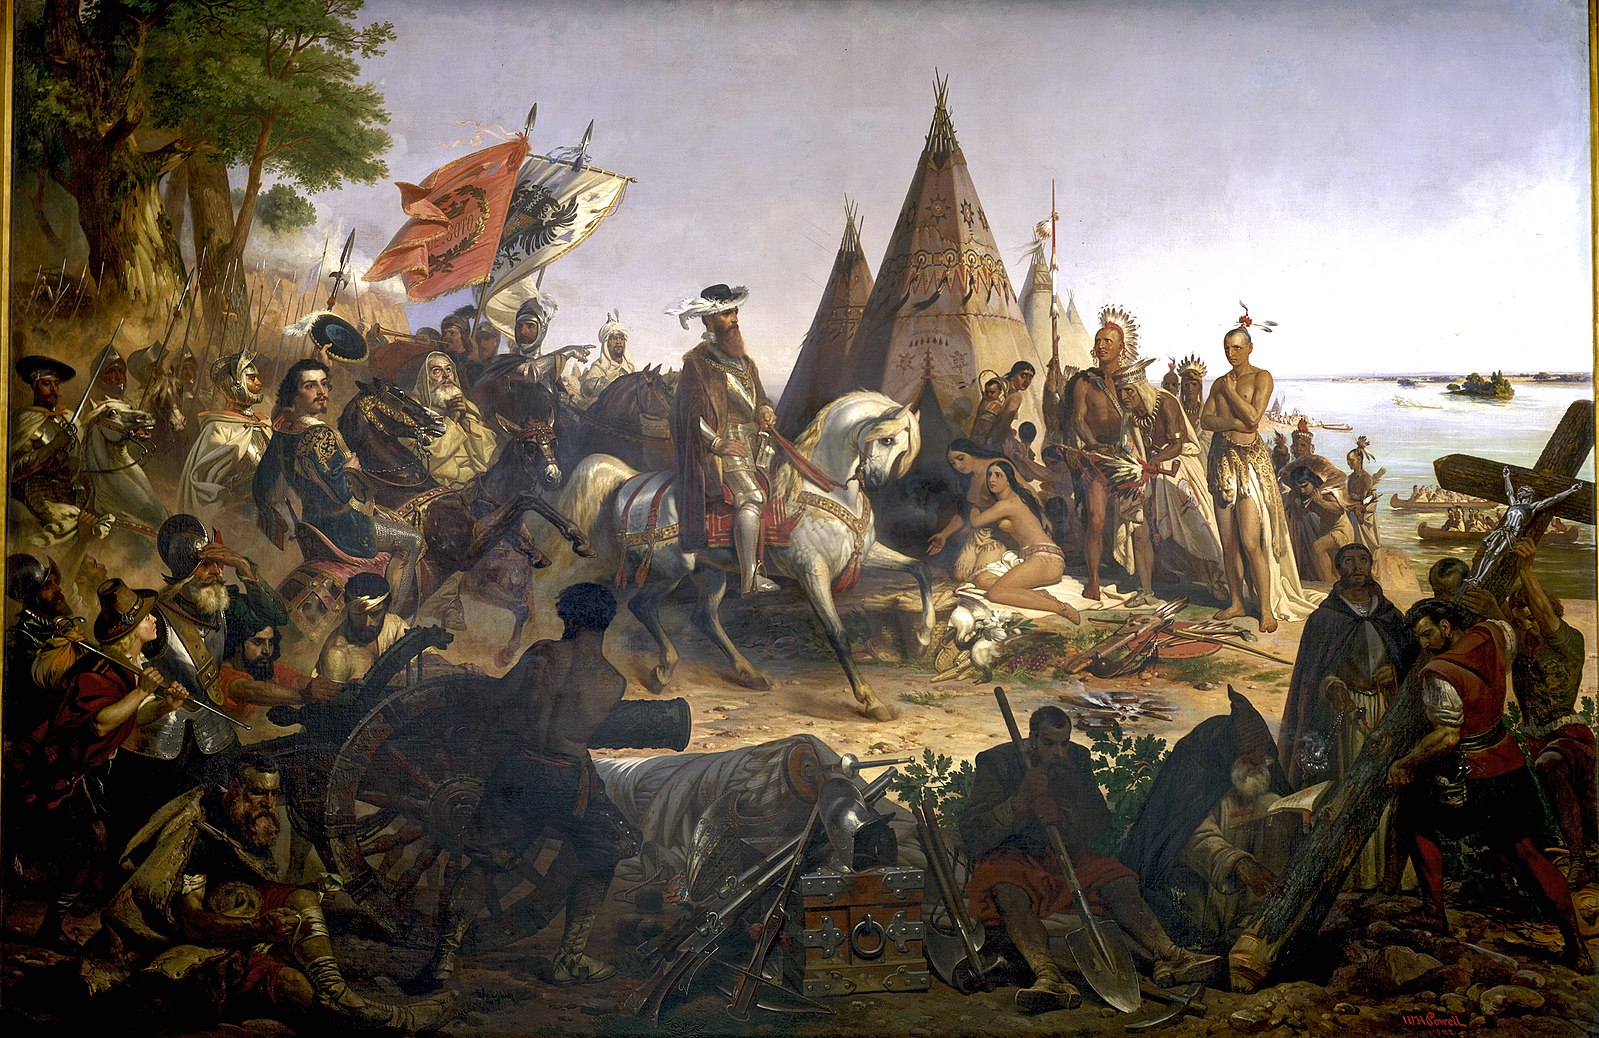 Spanish explorers with their military and religious gear surrounding indigenous people.